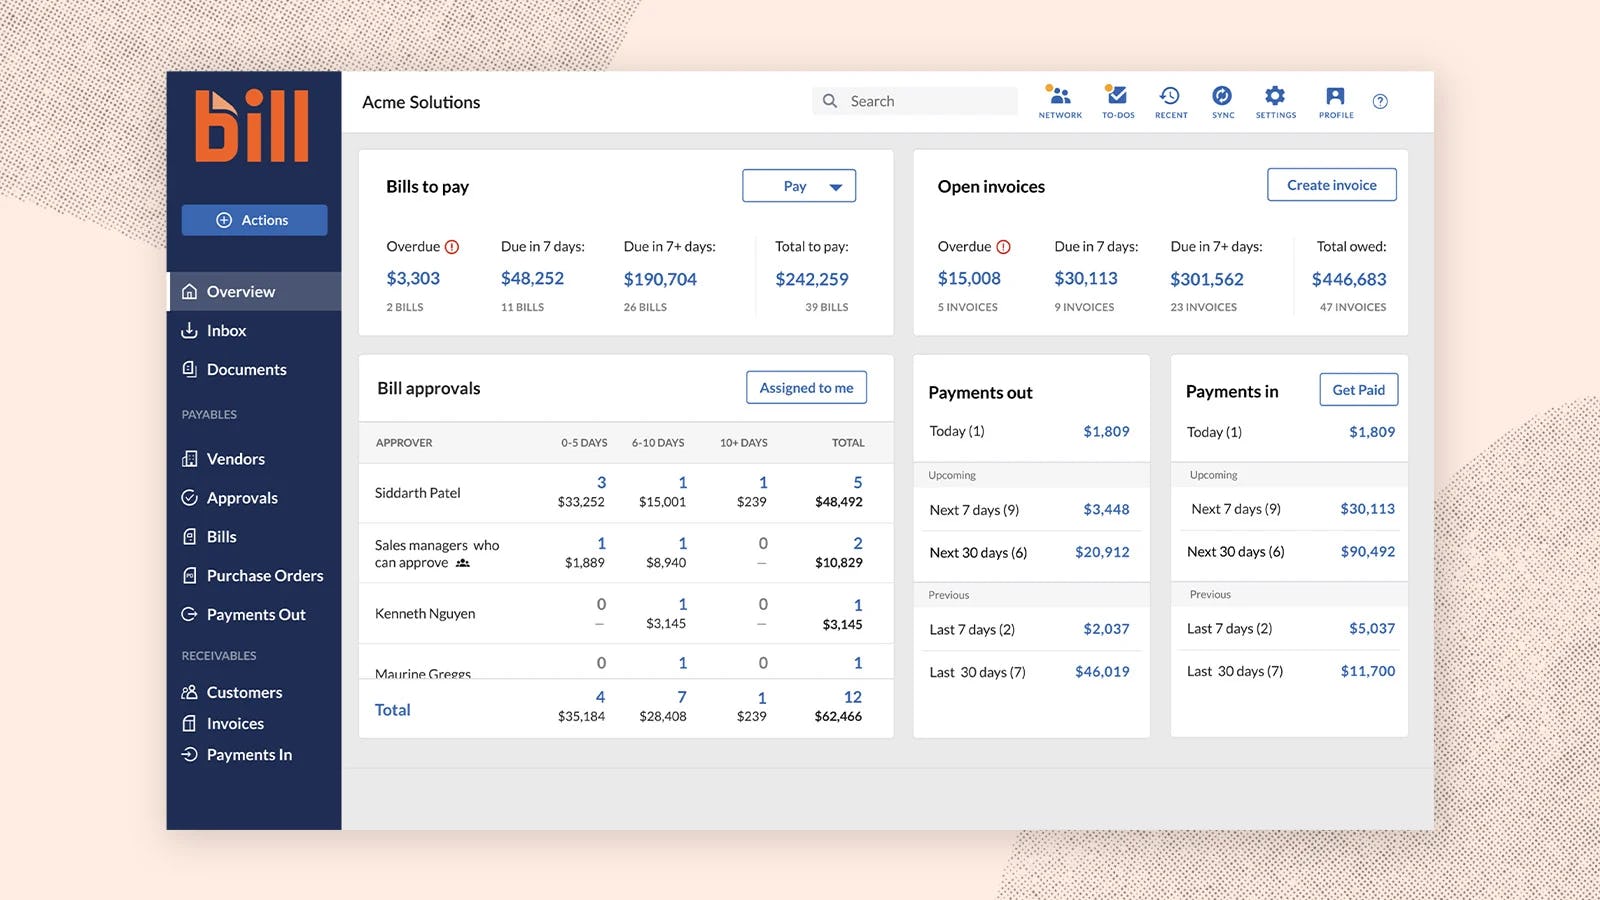 Bill.com Software - BILL's central dashboard makes it easy to see your upcoming bills, invoices, and ingoing and outgoing payments.